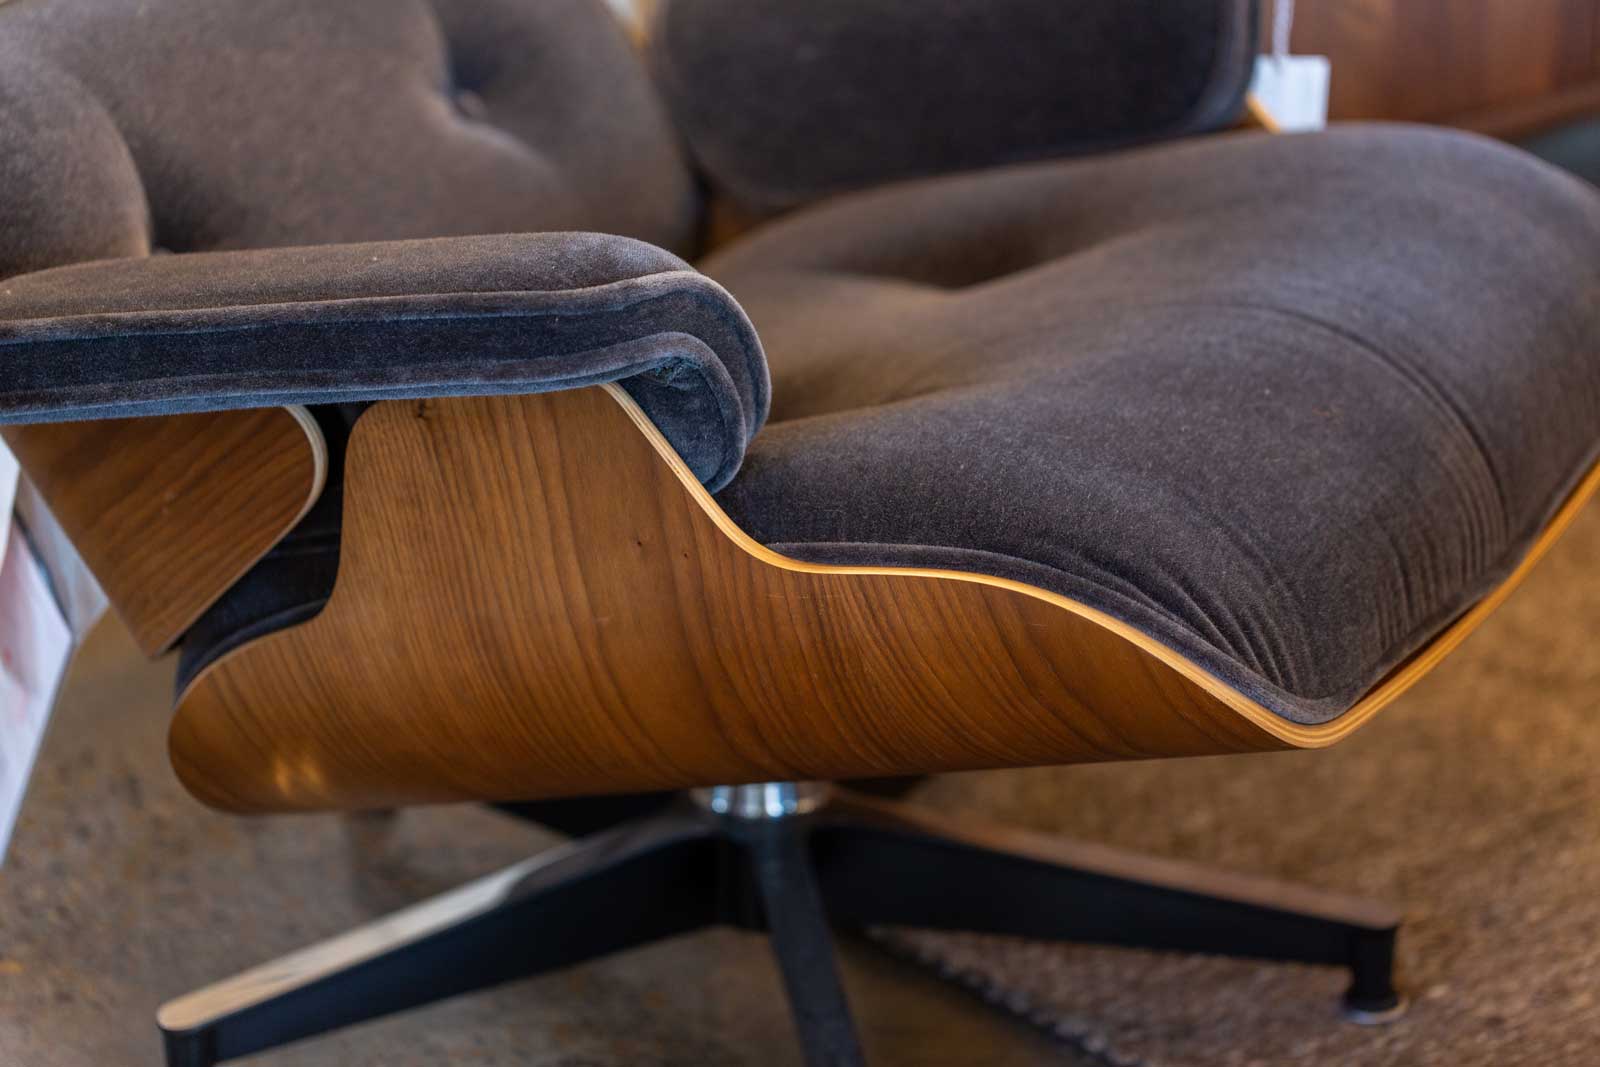 What Materials Is An Ergonomic Chair Made From?